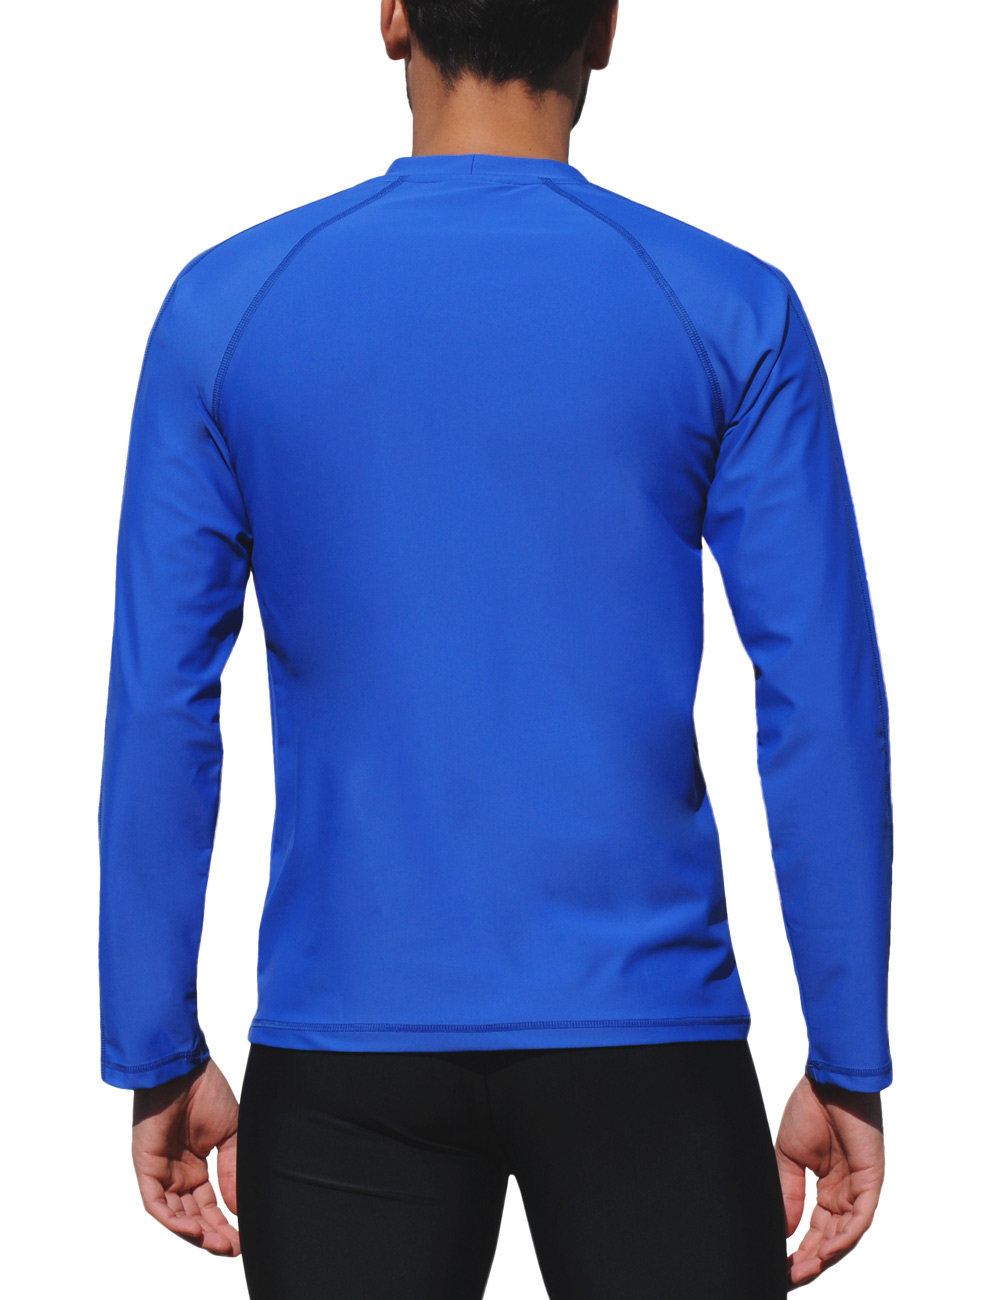 Men's Sun Protection Shirt Loose Fit Long Sleeve Beach and Water 